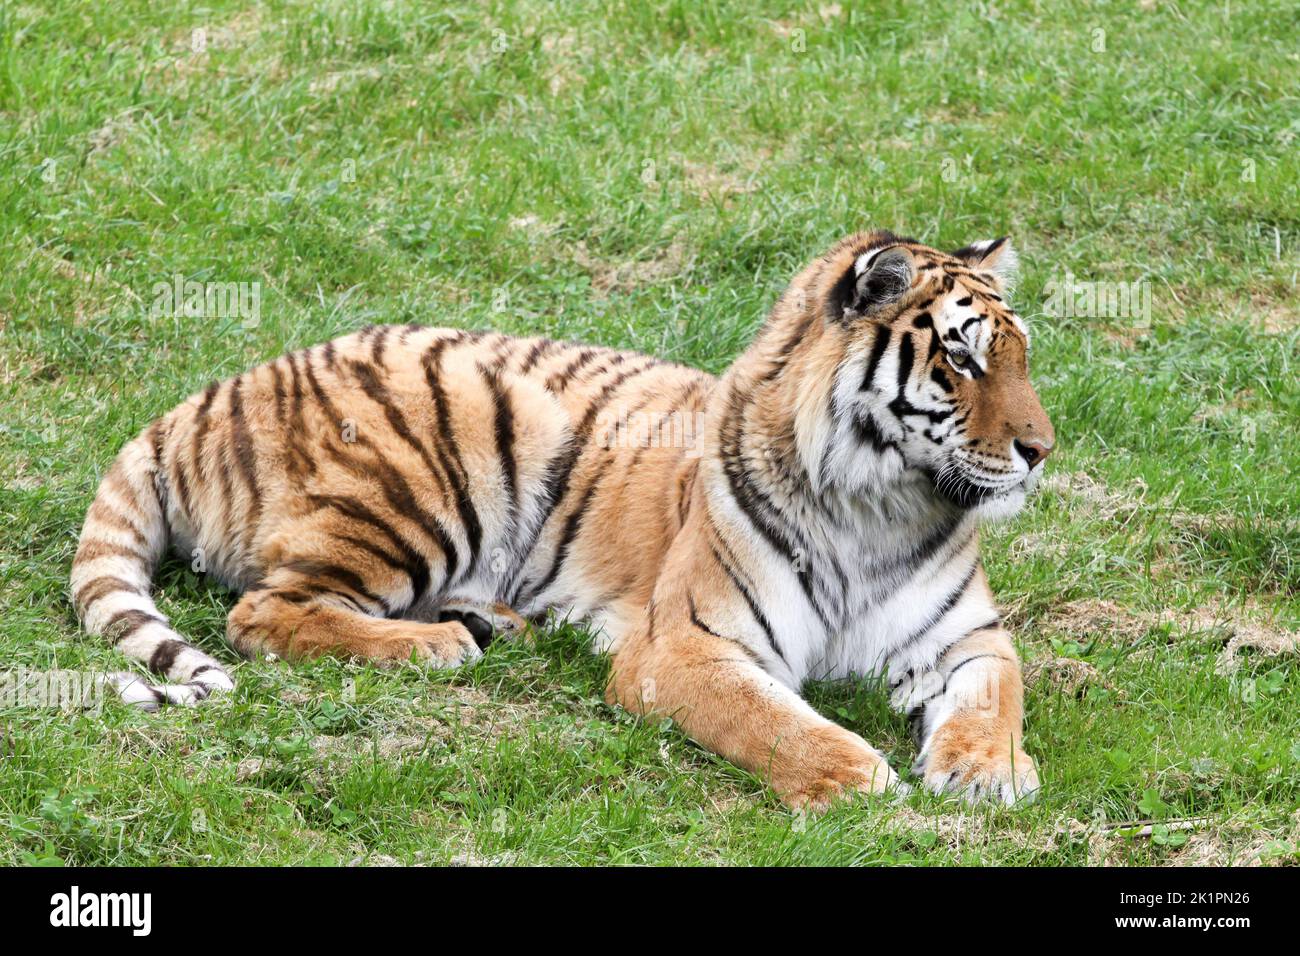 Portrait of a tiger lying in the grass Stock Photo